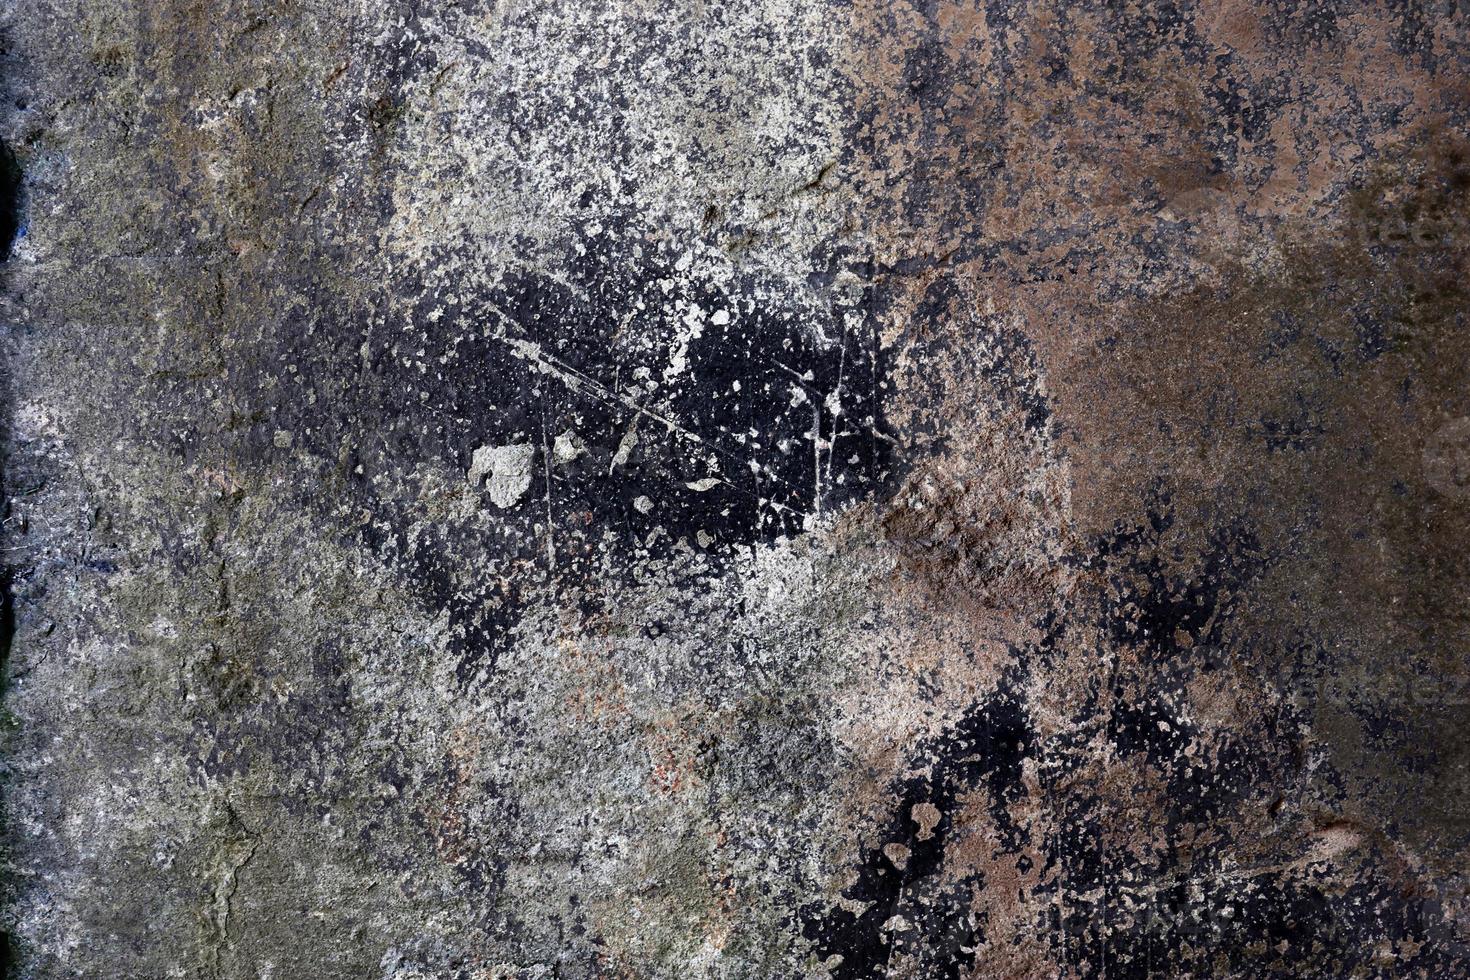 Close up view at a granite and stone wall texture in a high resolution. photo